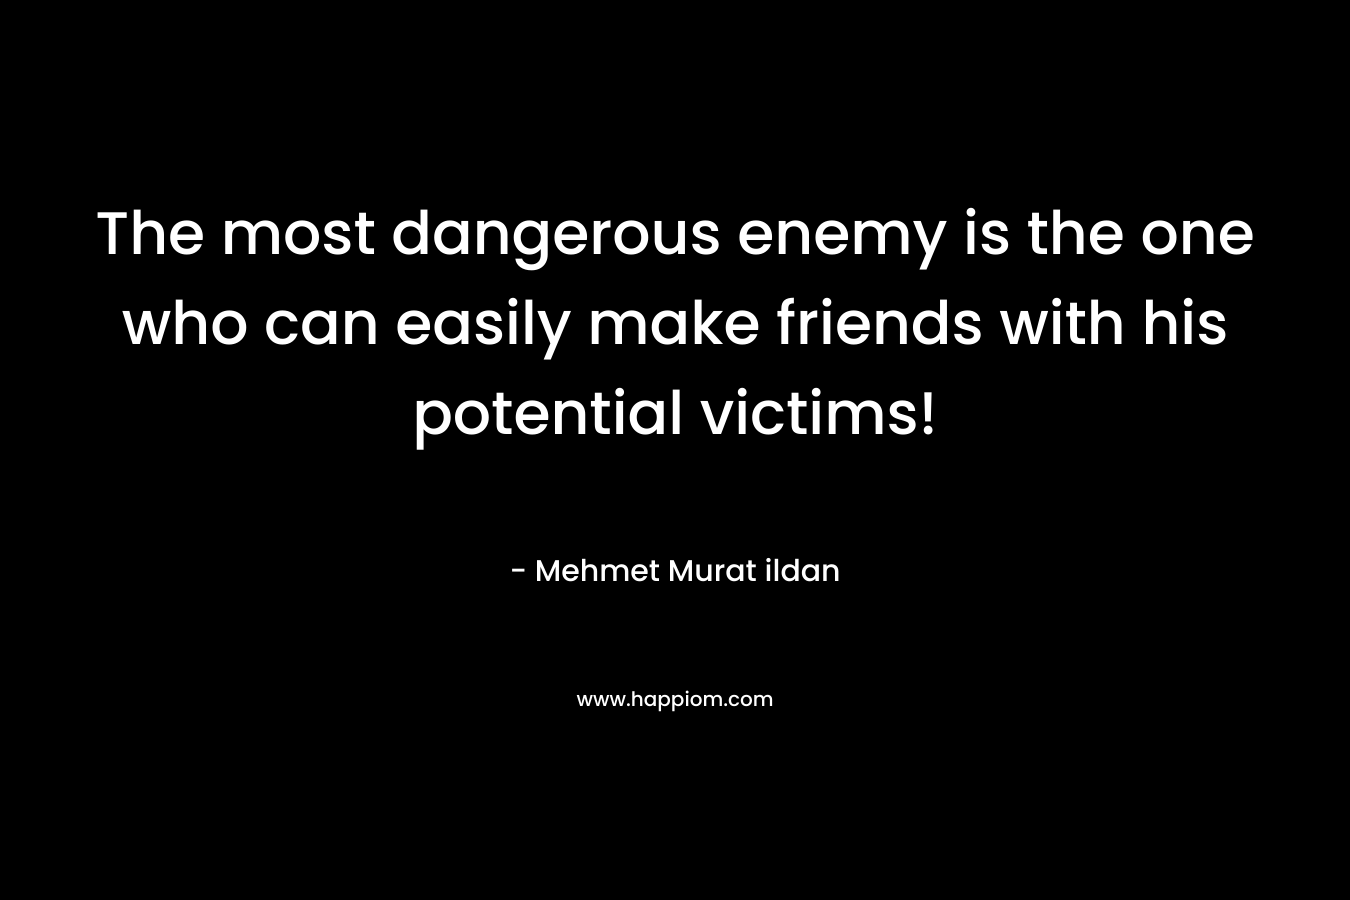 The most dangerous enemy is the one who can easily make friends with his potential victims! – Mehmet Murat ildan